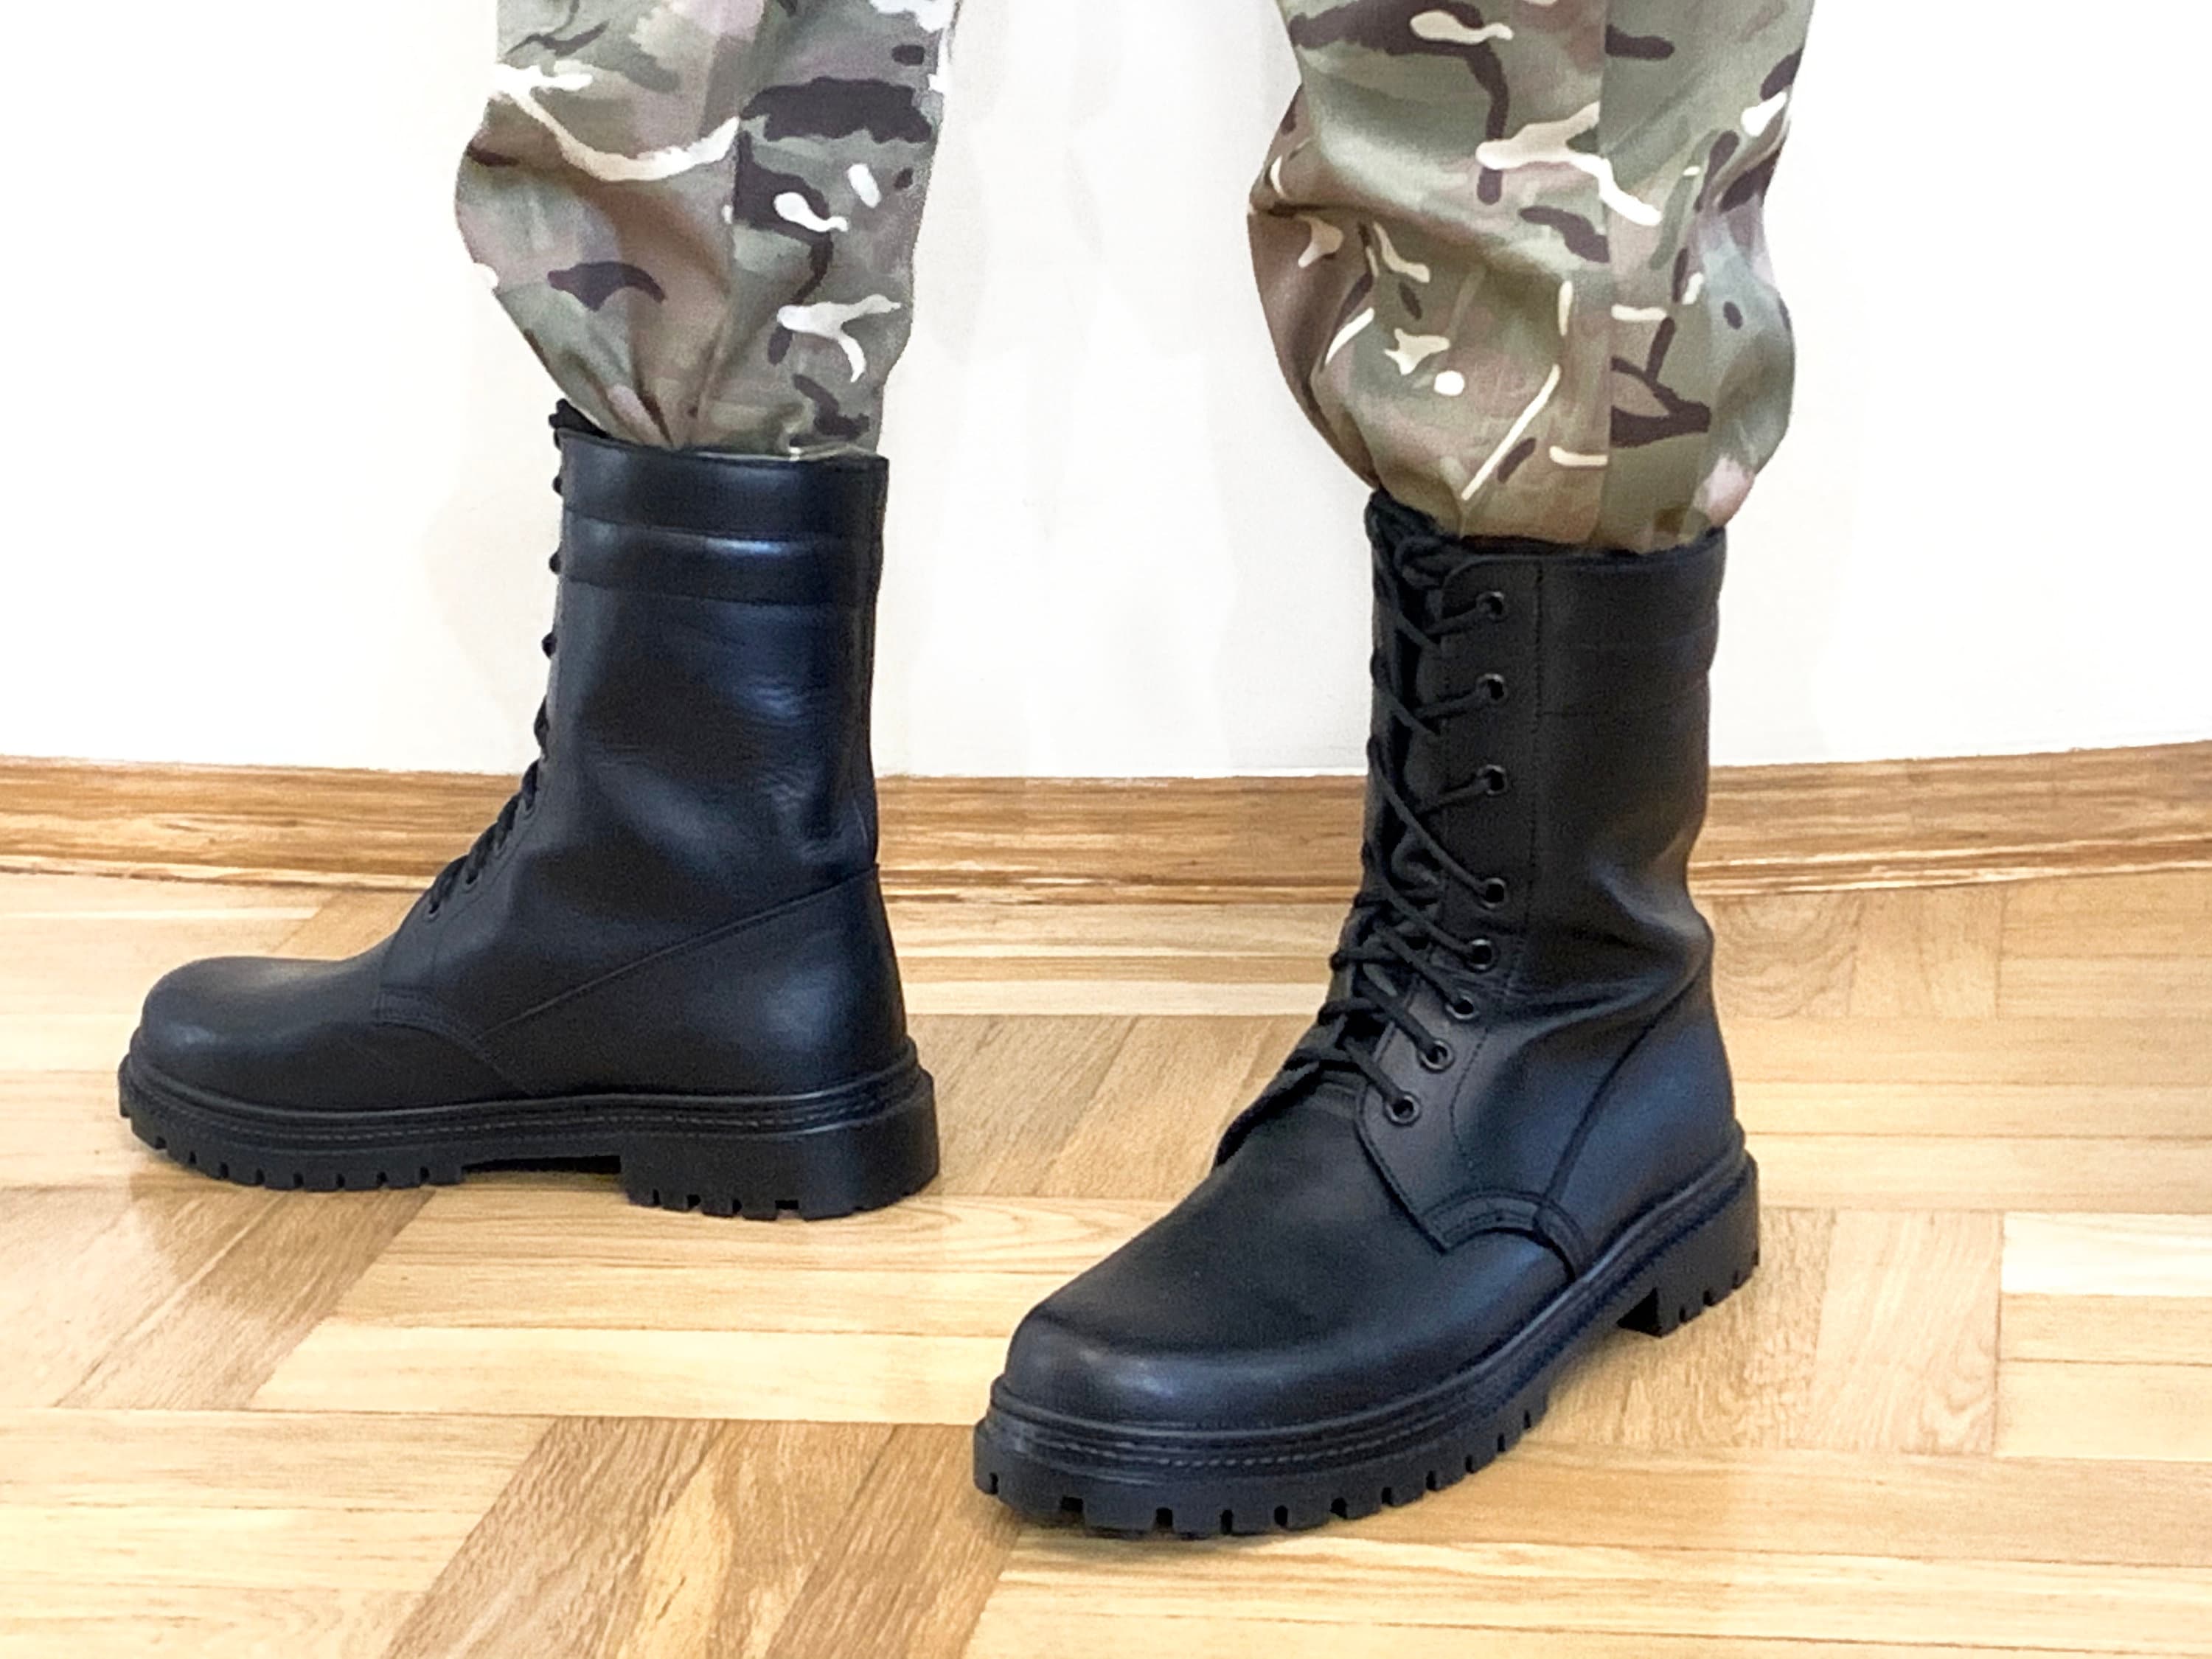 Ukrainian Leather High Boots Special Forces Military Combat - Etsy ...